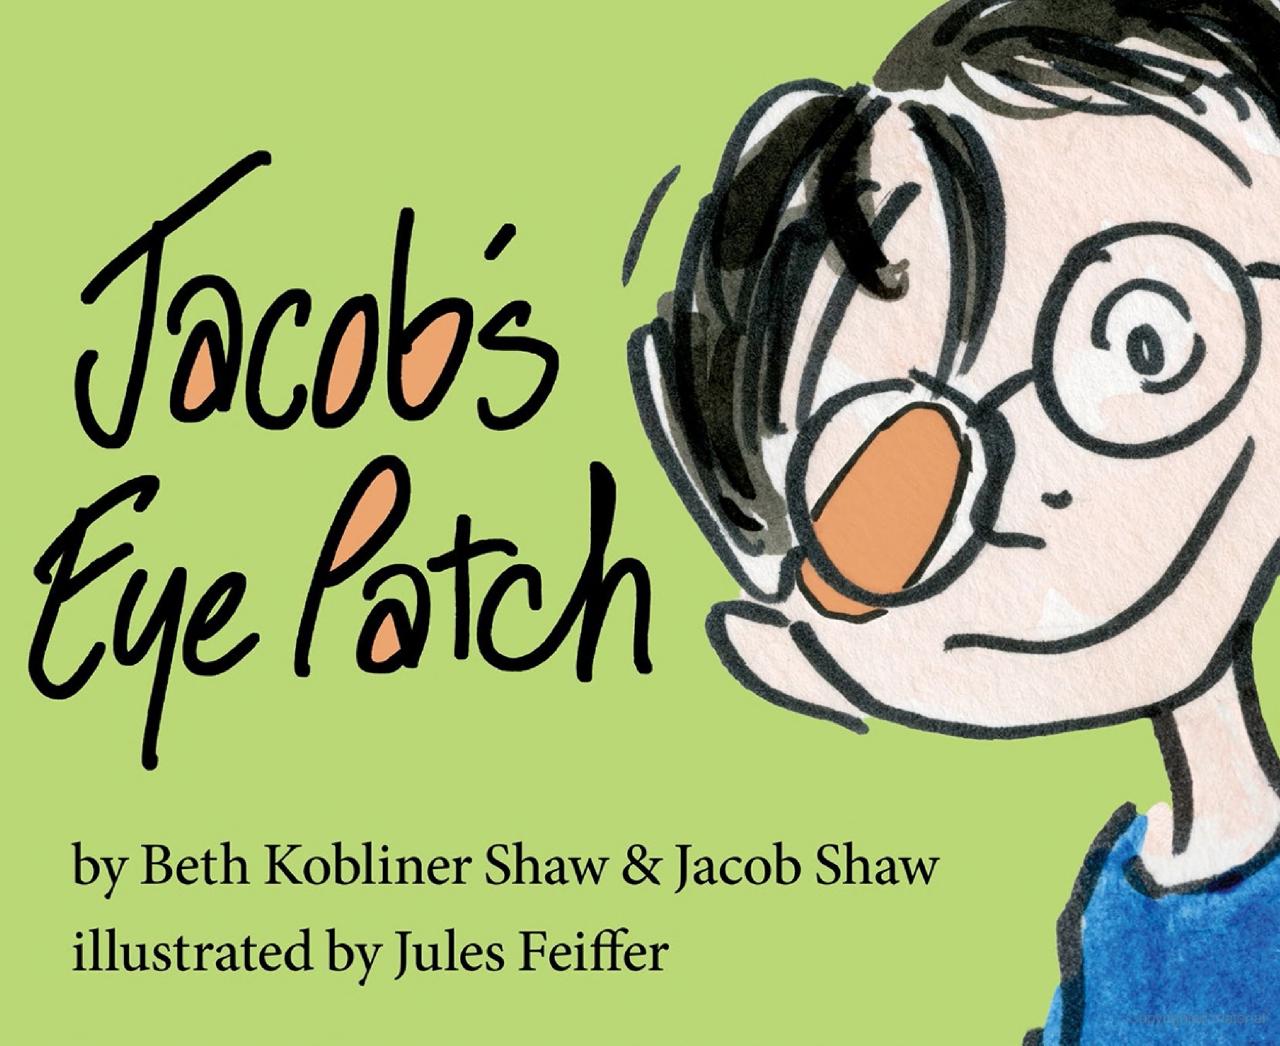 Jacob's Eye Patch cover